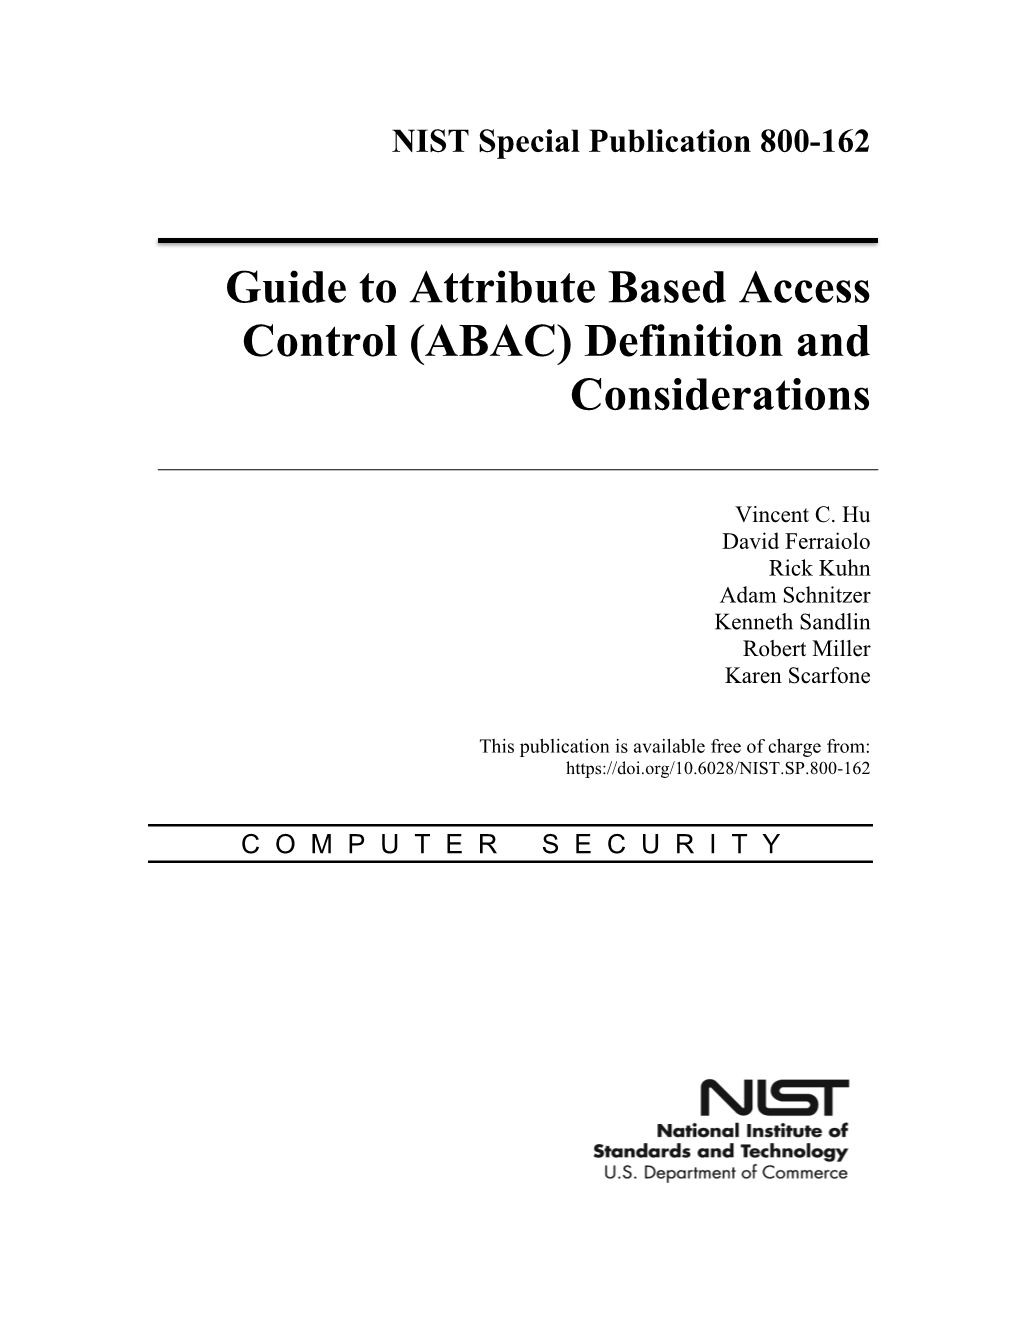 Guide to Attribute Based Access Control (ABAC) Definition and Considerations